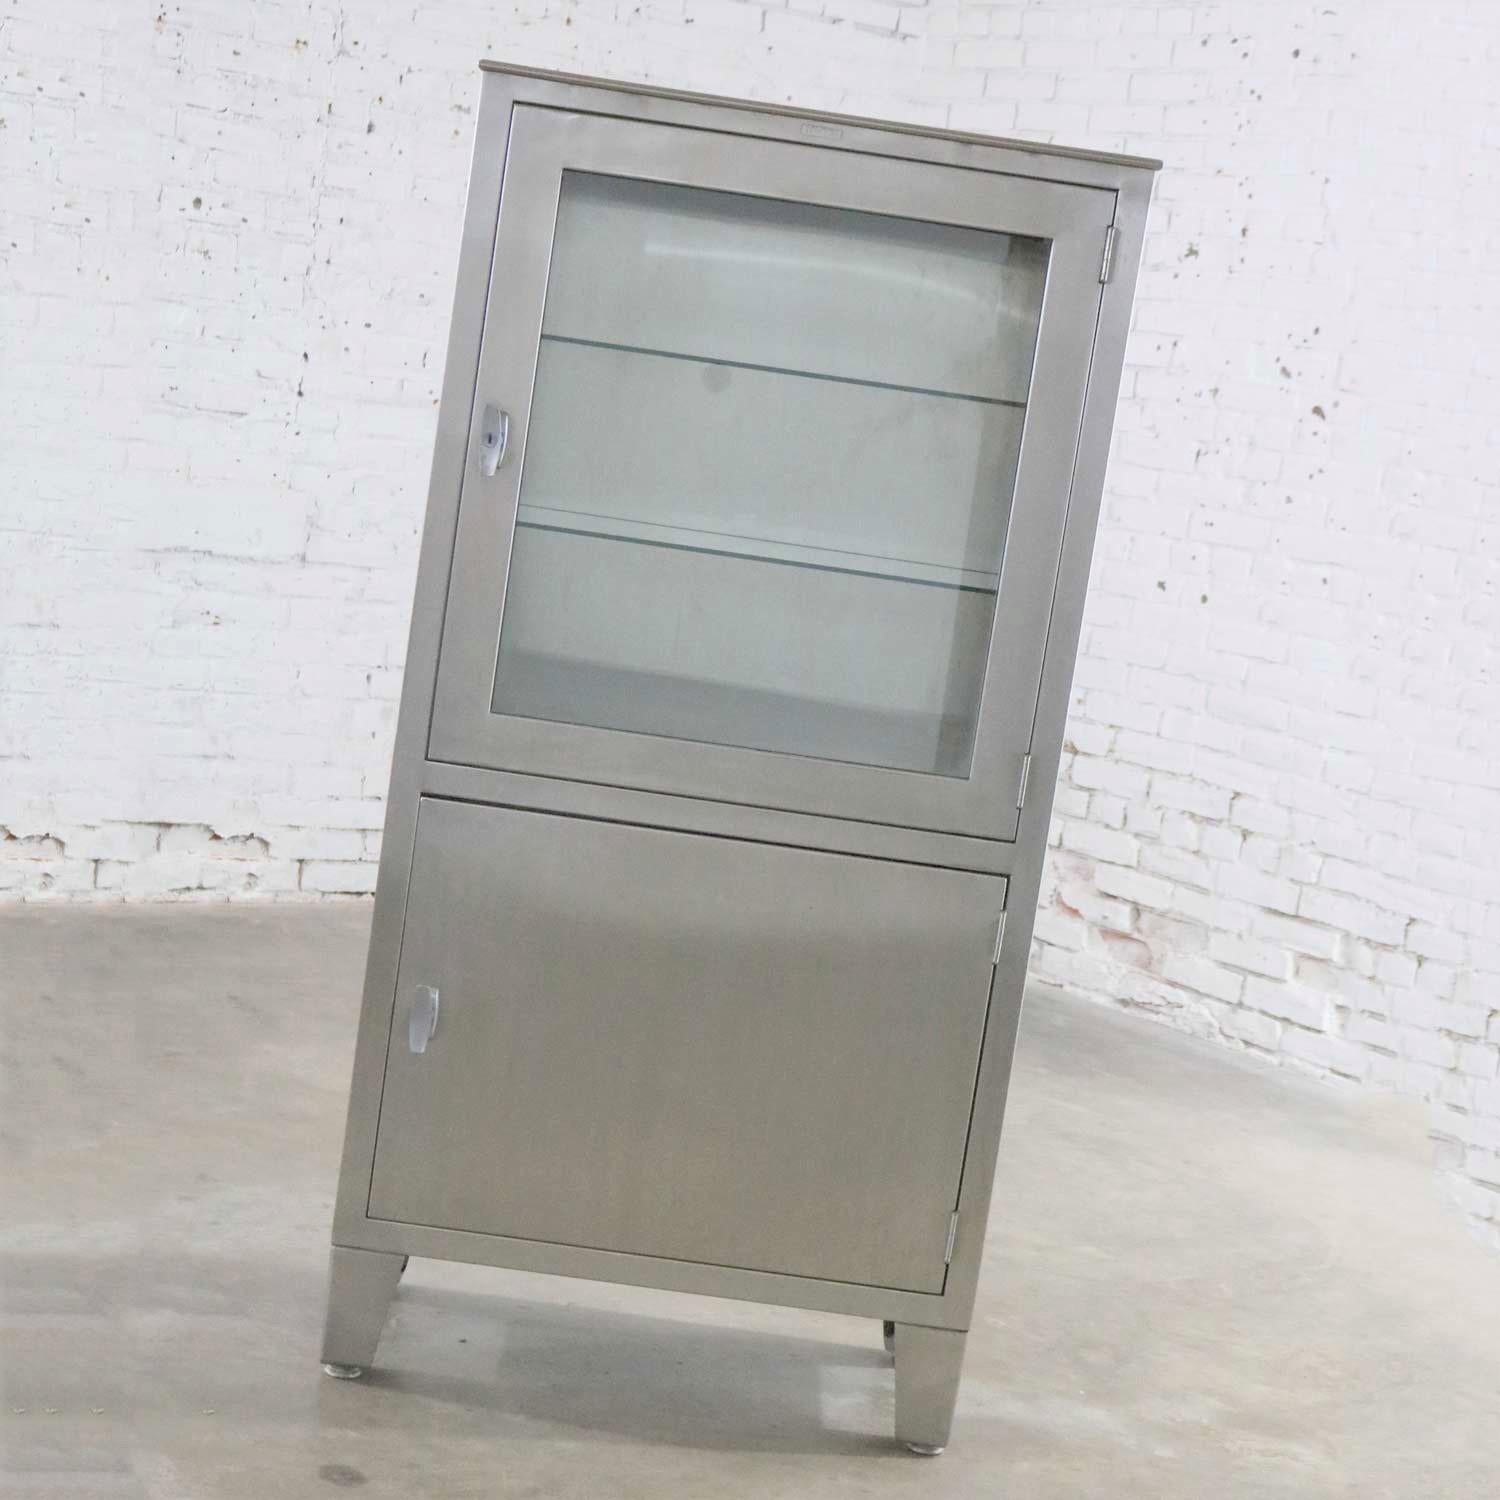 Fabulous stainless steel industrial medical cabinet that is perfect for display. In great vintage age appropriate condition with small nicks and dings and scratches as you would expect but an over-all incredible look, circa 1950s. 

Fabulous!